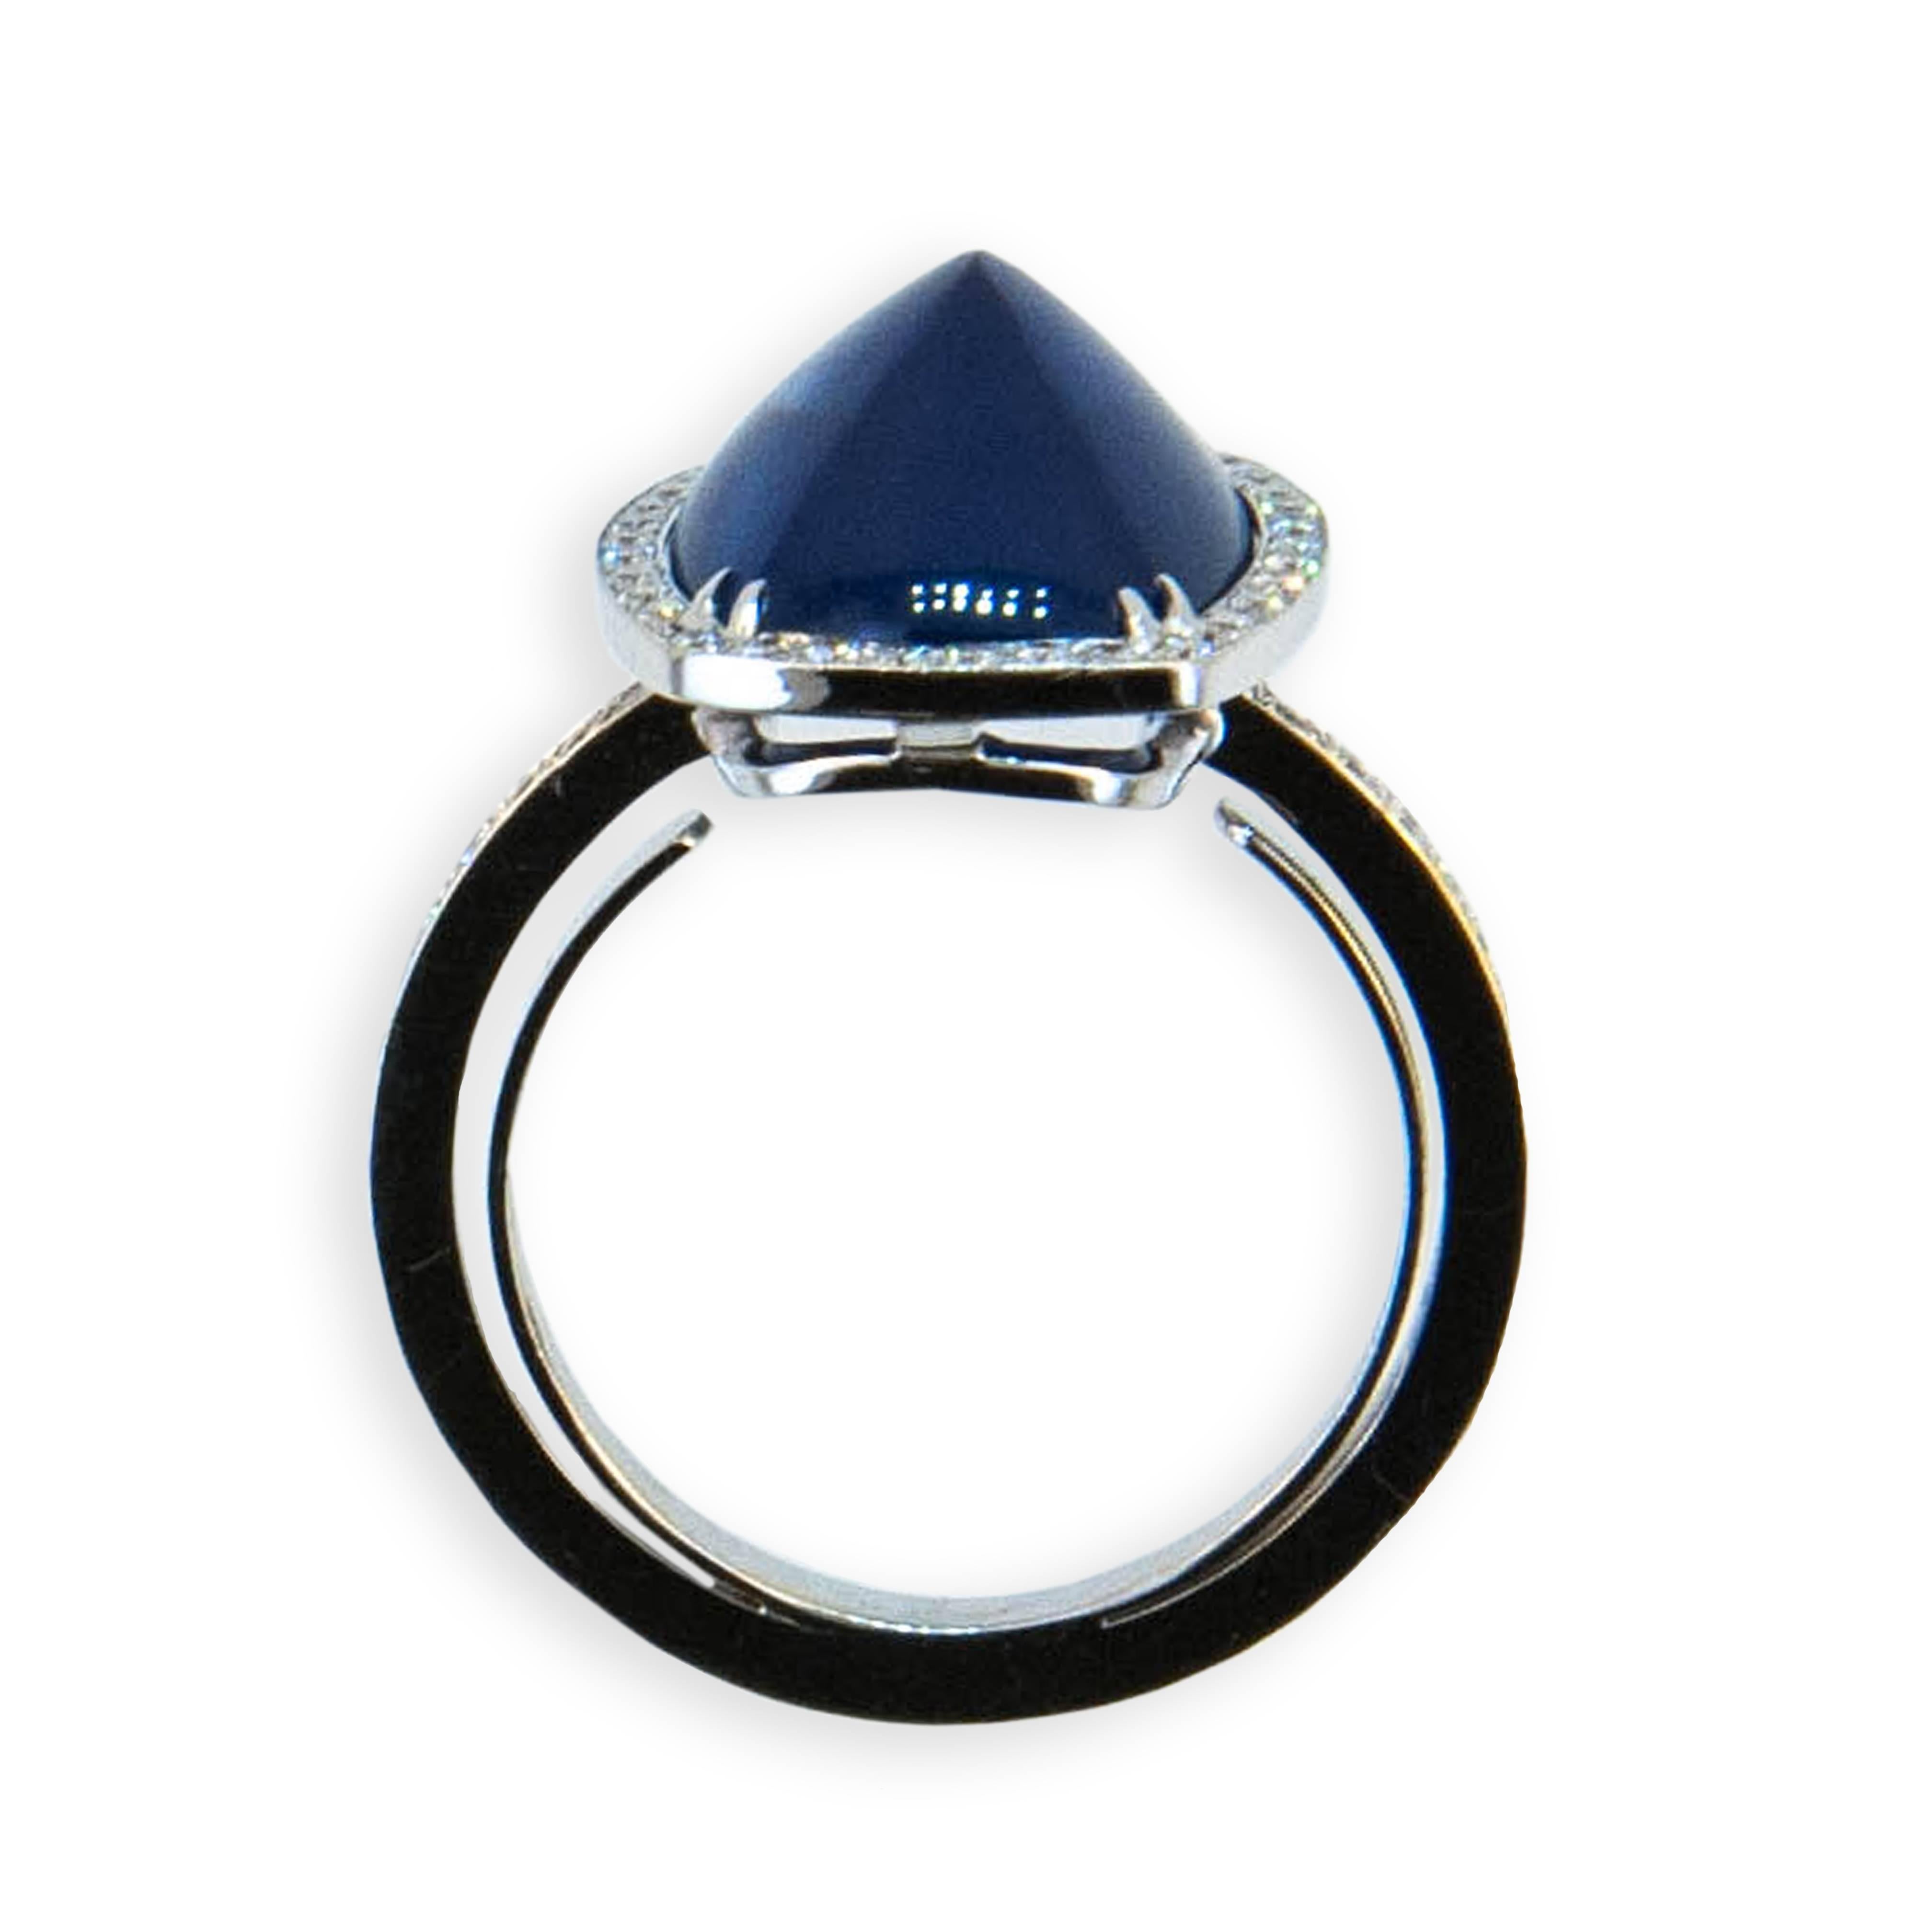 18 karat white gold ring set with (1) 9.02 carat sugarloaf cut Blue sapphire set with (70) microset diamonds .40 carats total weight. Size 6 3/4.
With Horseshoe in shank.